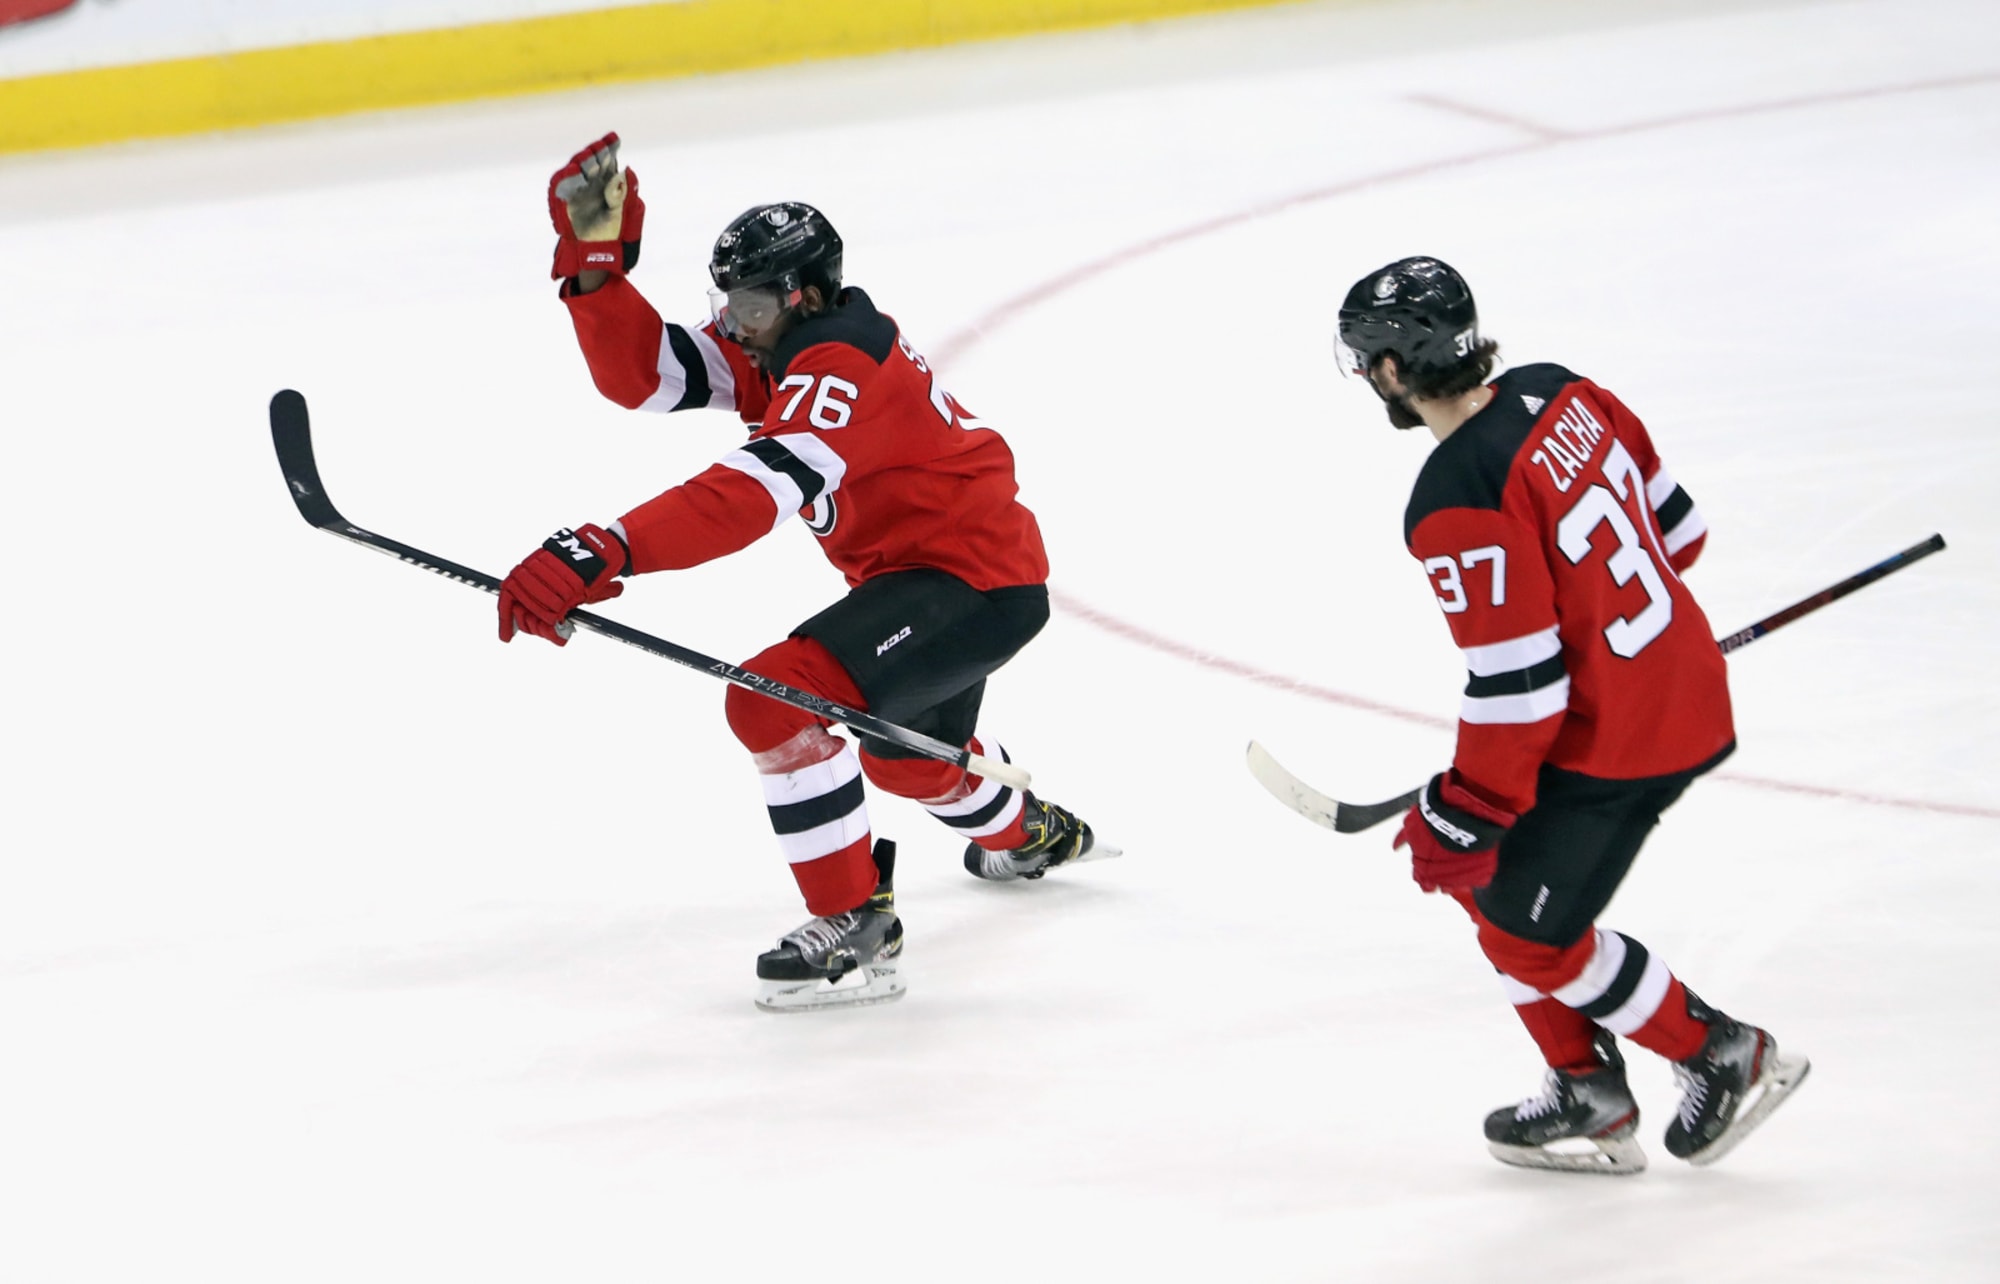 How Long Will the New Jersey Devils Keep P.K. Subban? - All About The Jersey